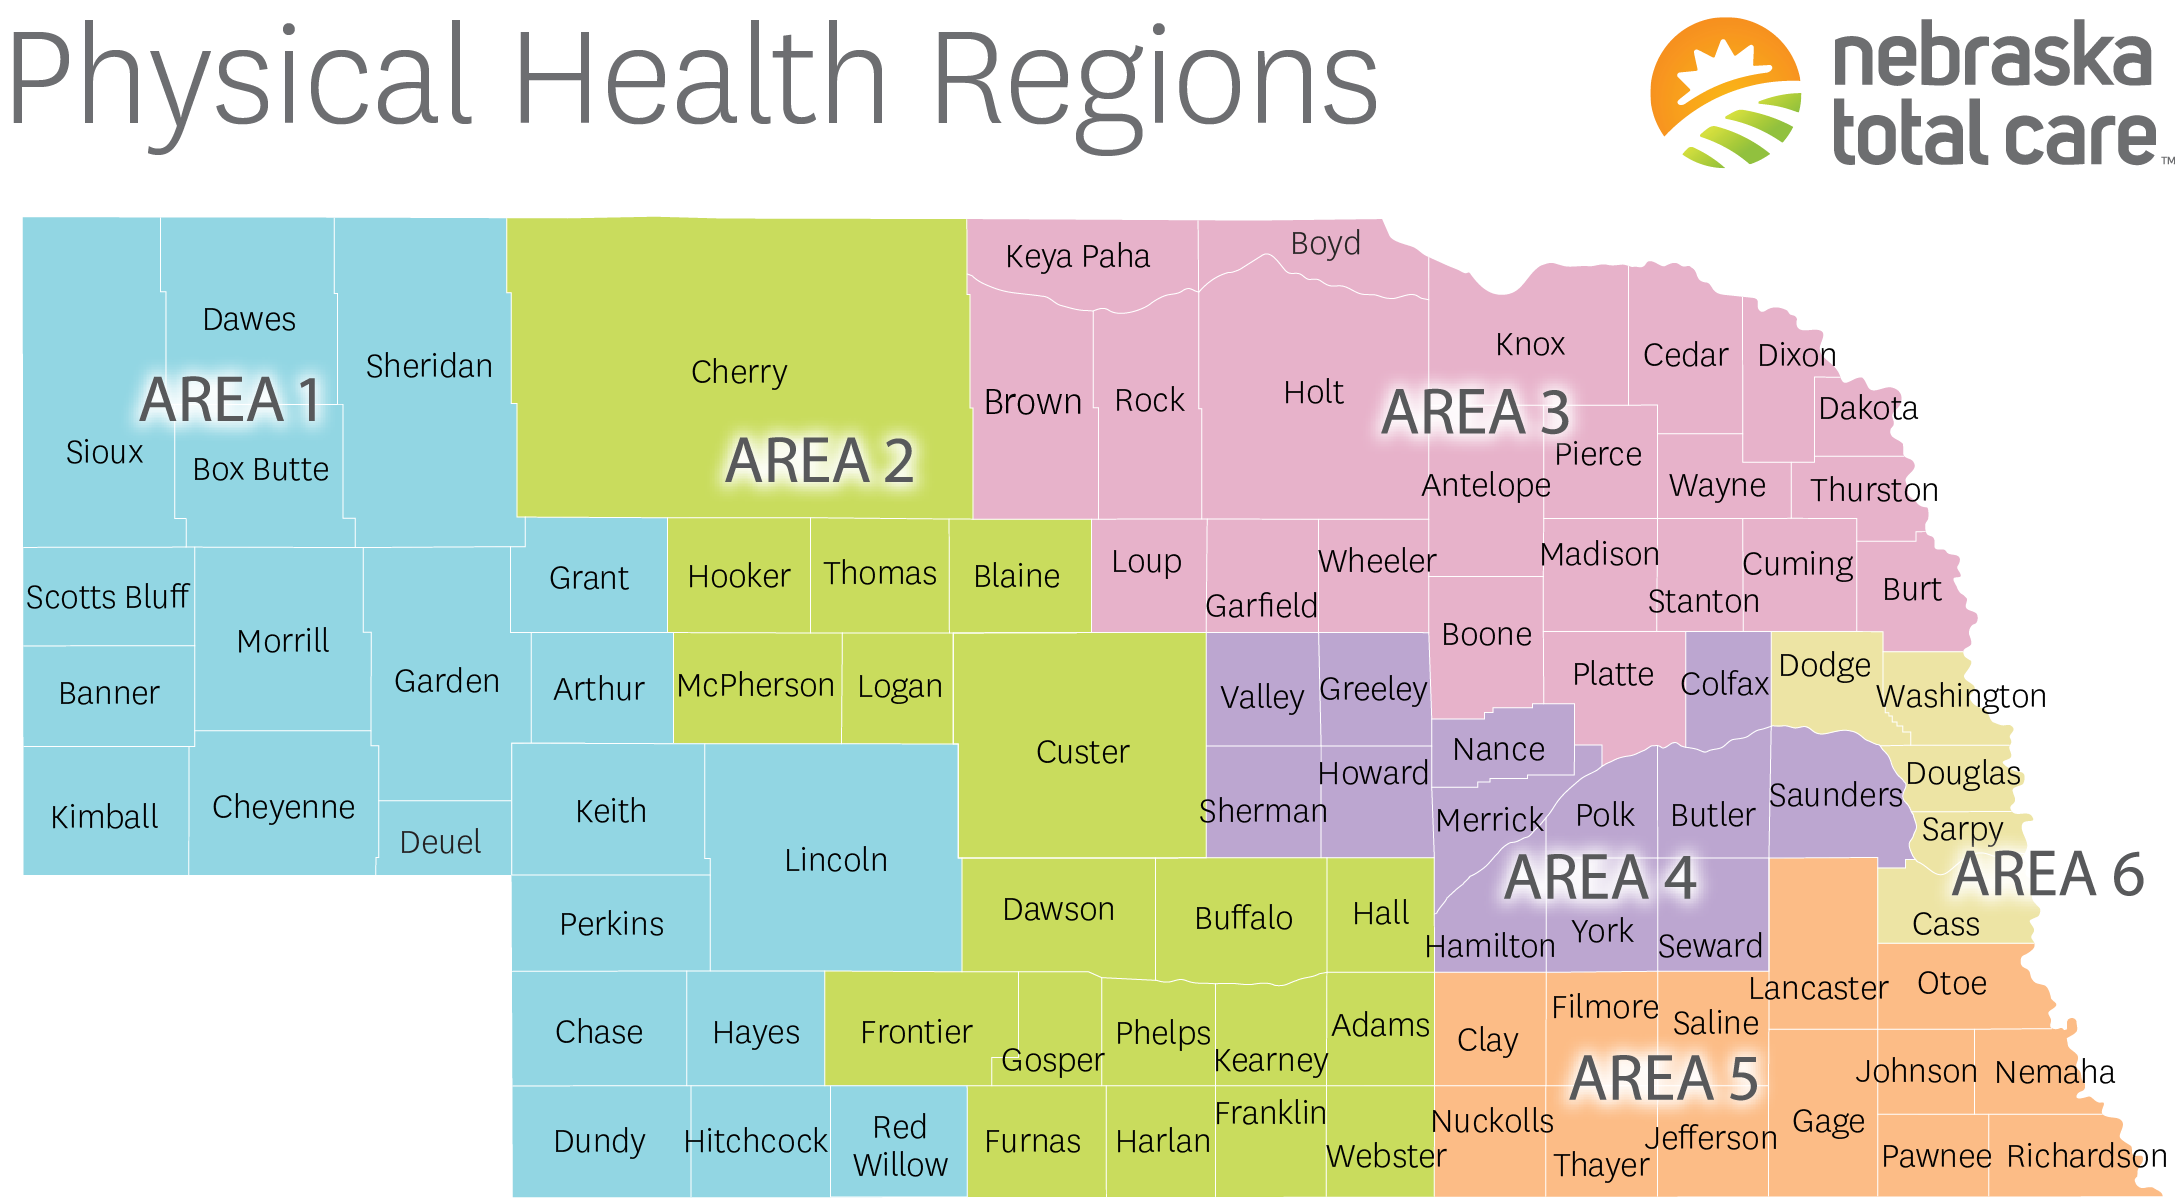 Territory Map. Physical Health Provider Relations Reps. For assistance, contact 1-844-385-2192, Relay 711.